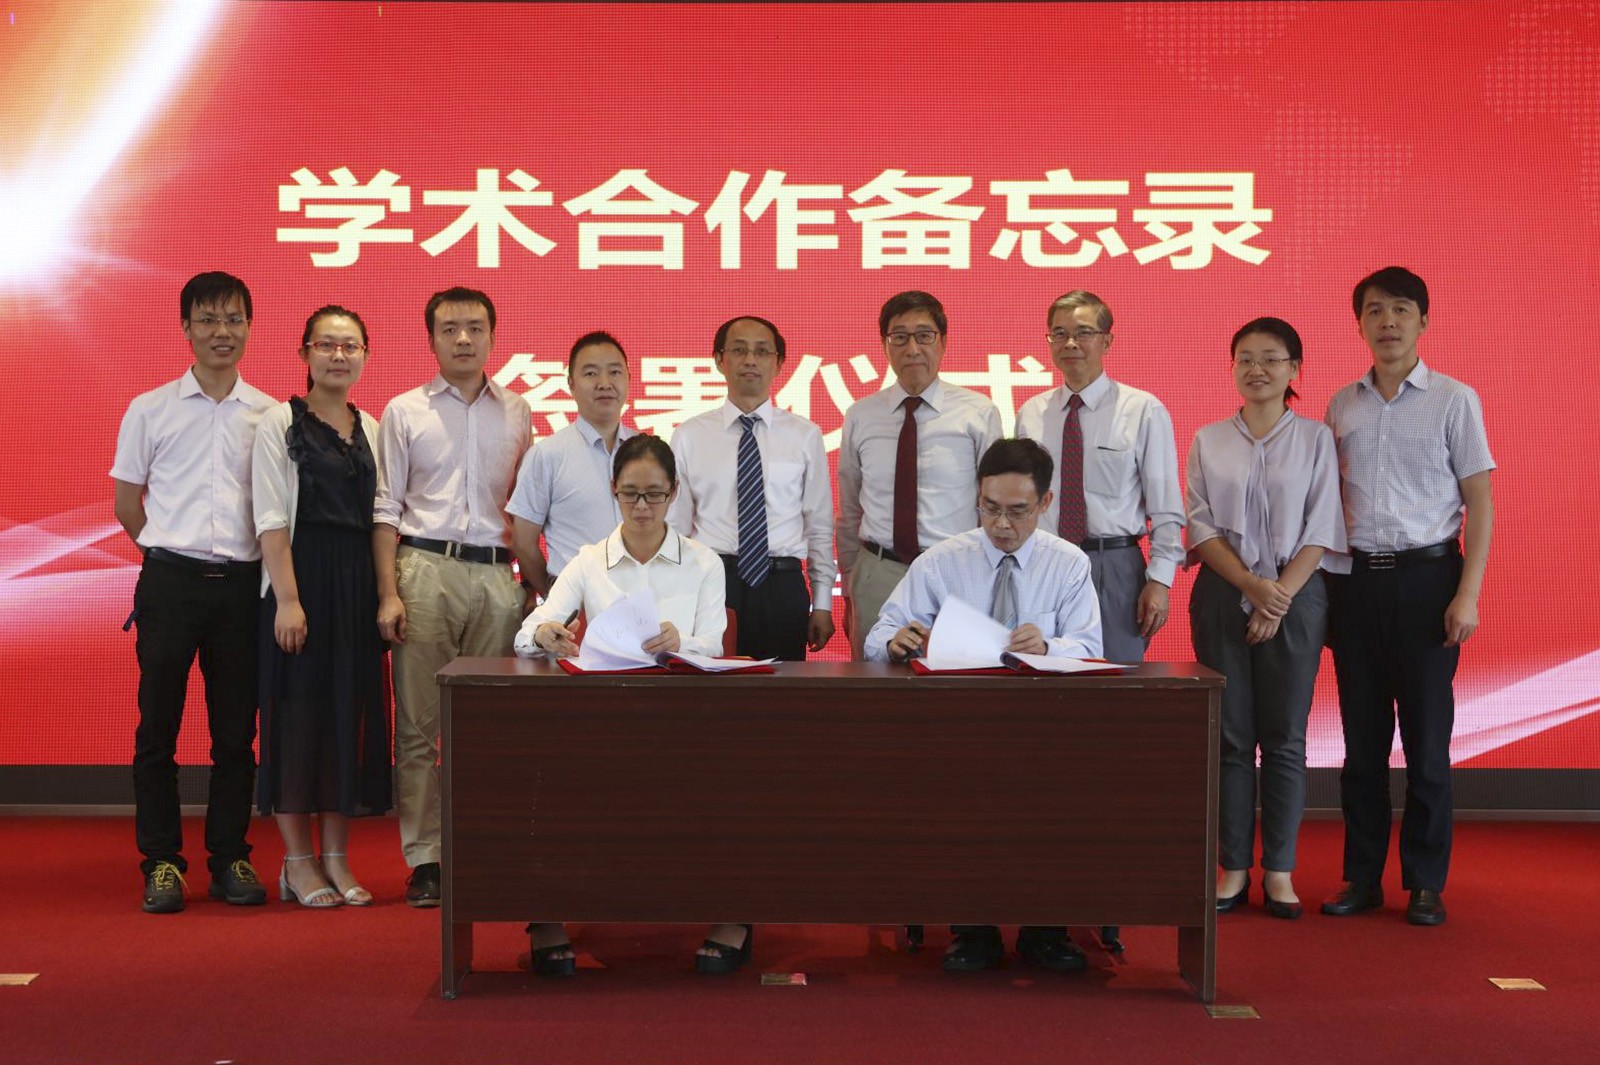 Professor Kuo (4th from right, back row) led a delegation to visit INEST where a framework agreement was signed for the deepening of collaboration.